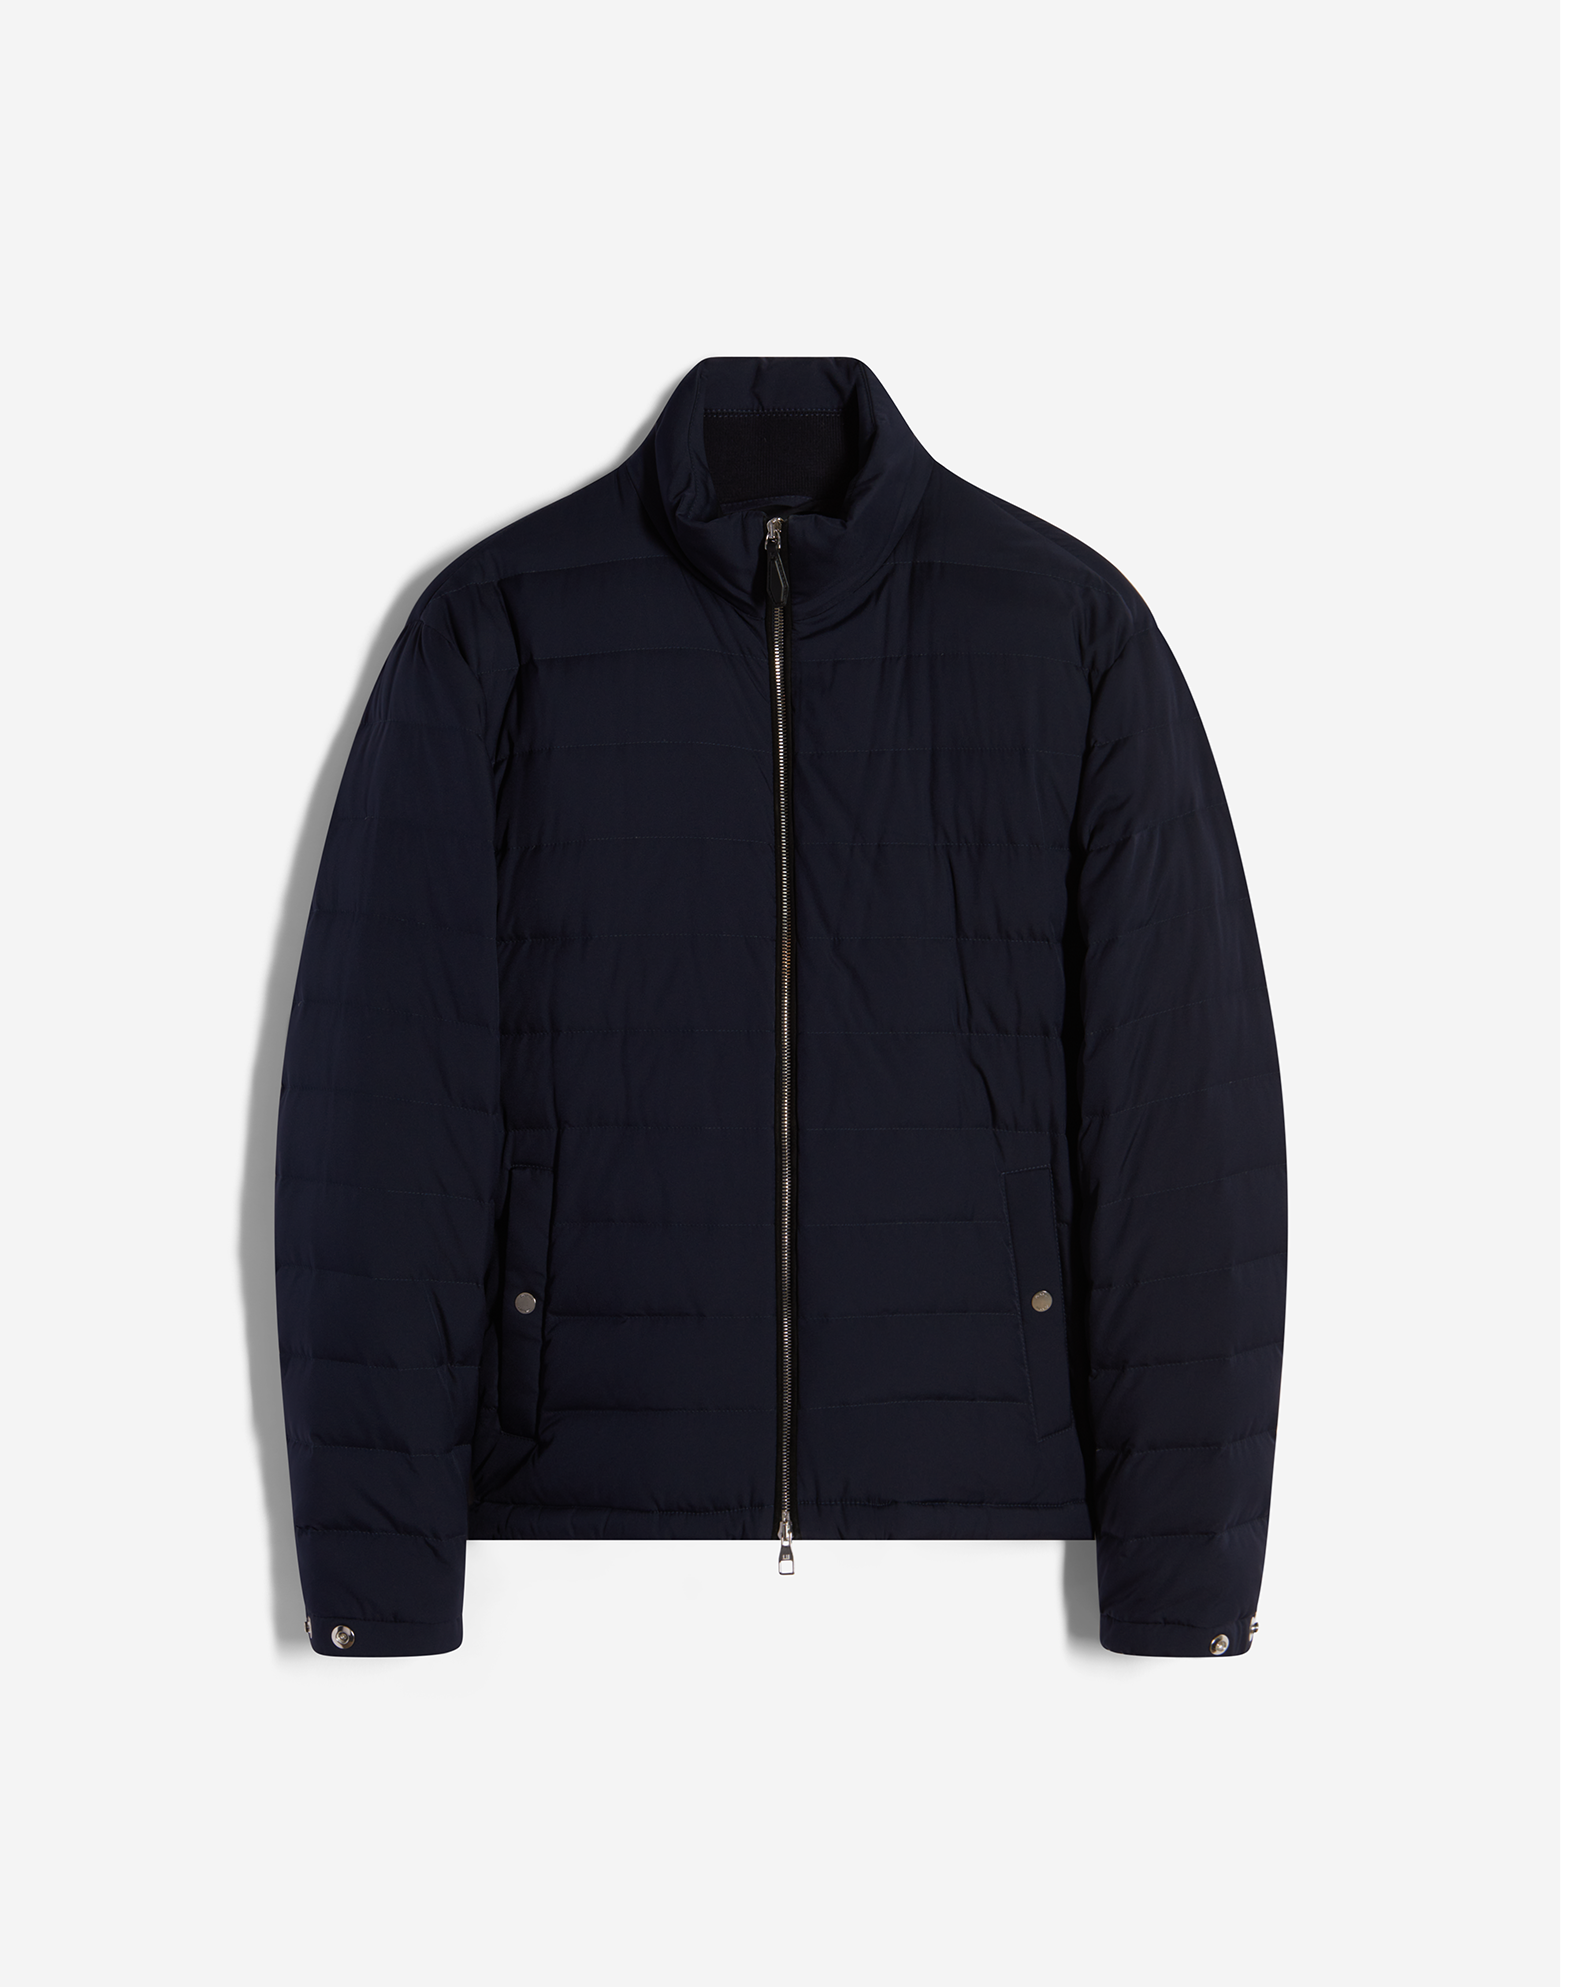 Dunhill Luxury Men's Down Jackets